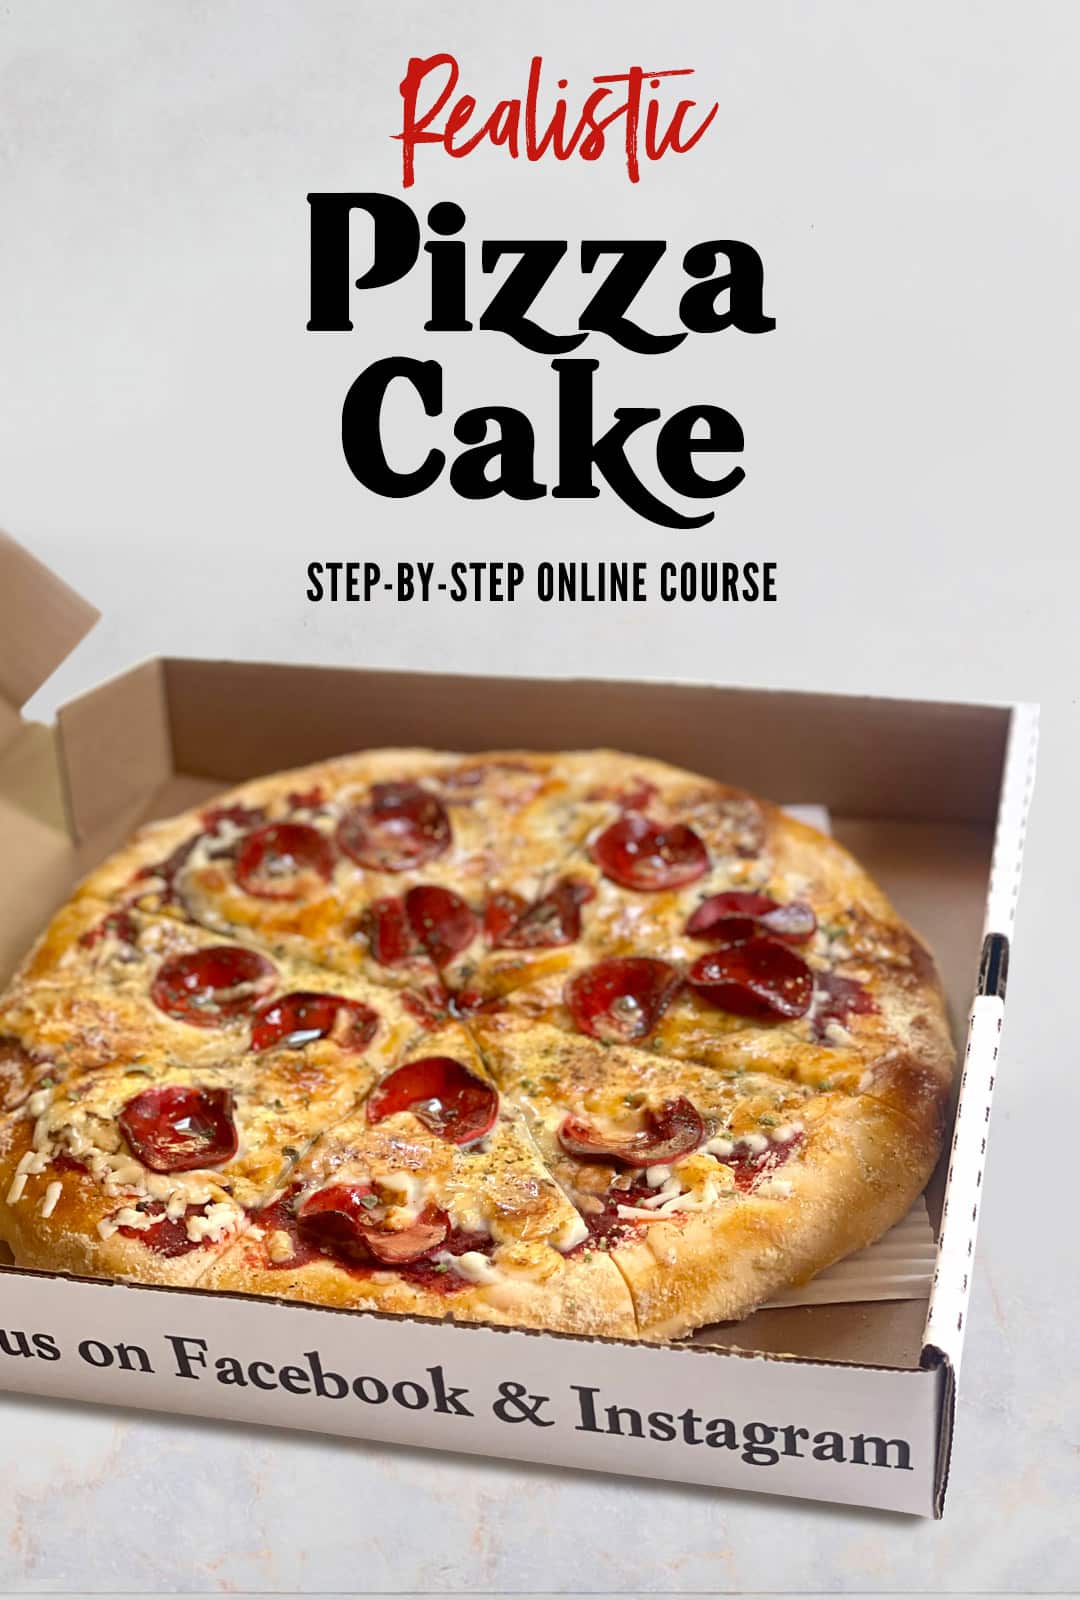 Cake sculpted to look like a pizza